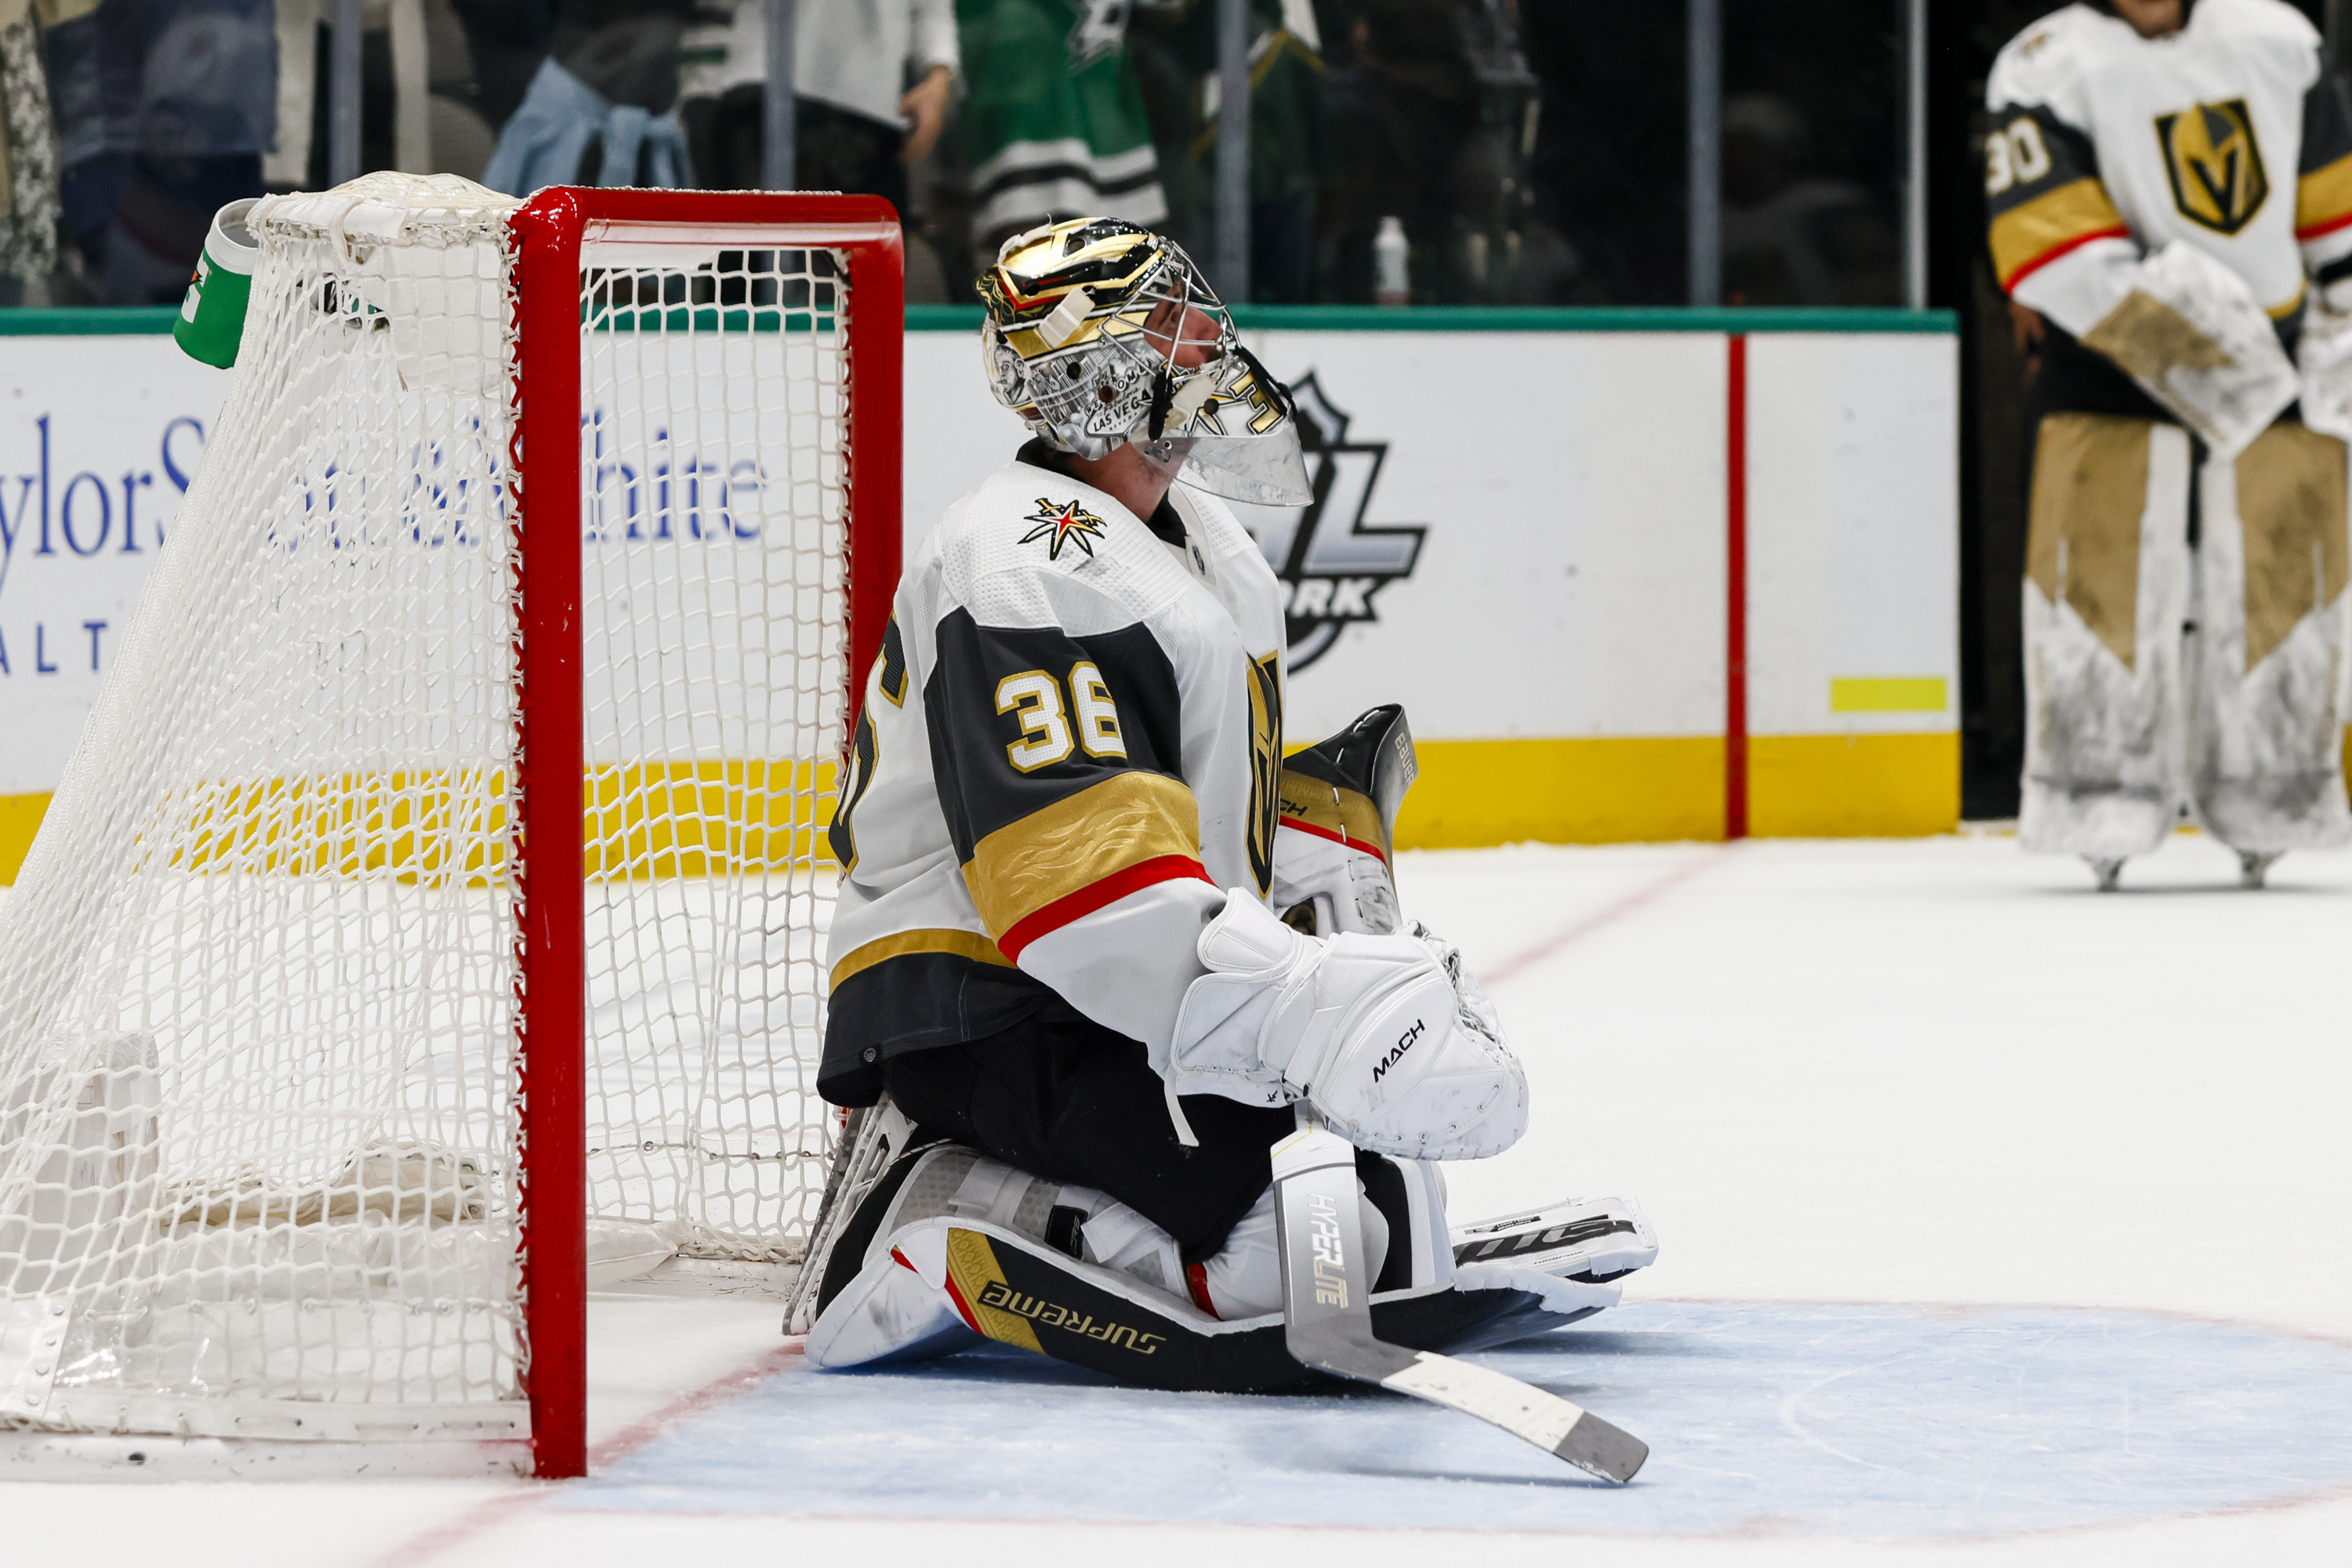 Vegas Golden Knights goaltender Logan Thompson looks up at the videoboard after giving up the game winning goal during the game between the Dallas Stars and the Vegas Golden Knights on April 26, 2022 at the American Airlines Center in Dallas, Texas.